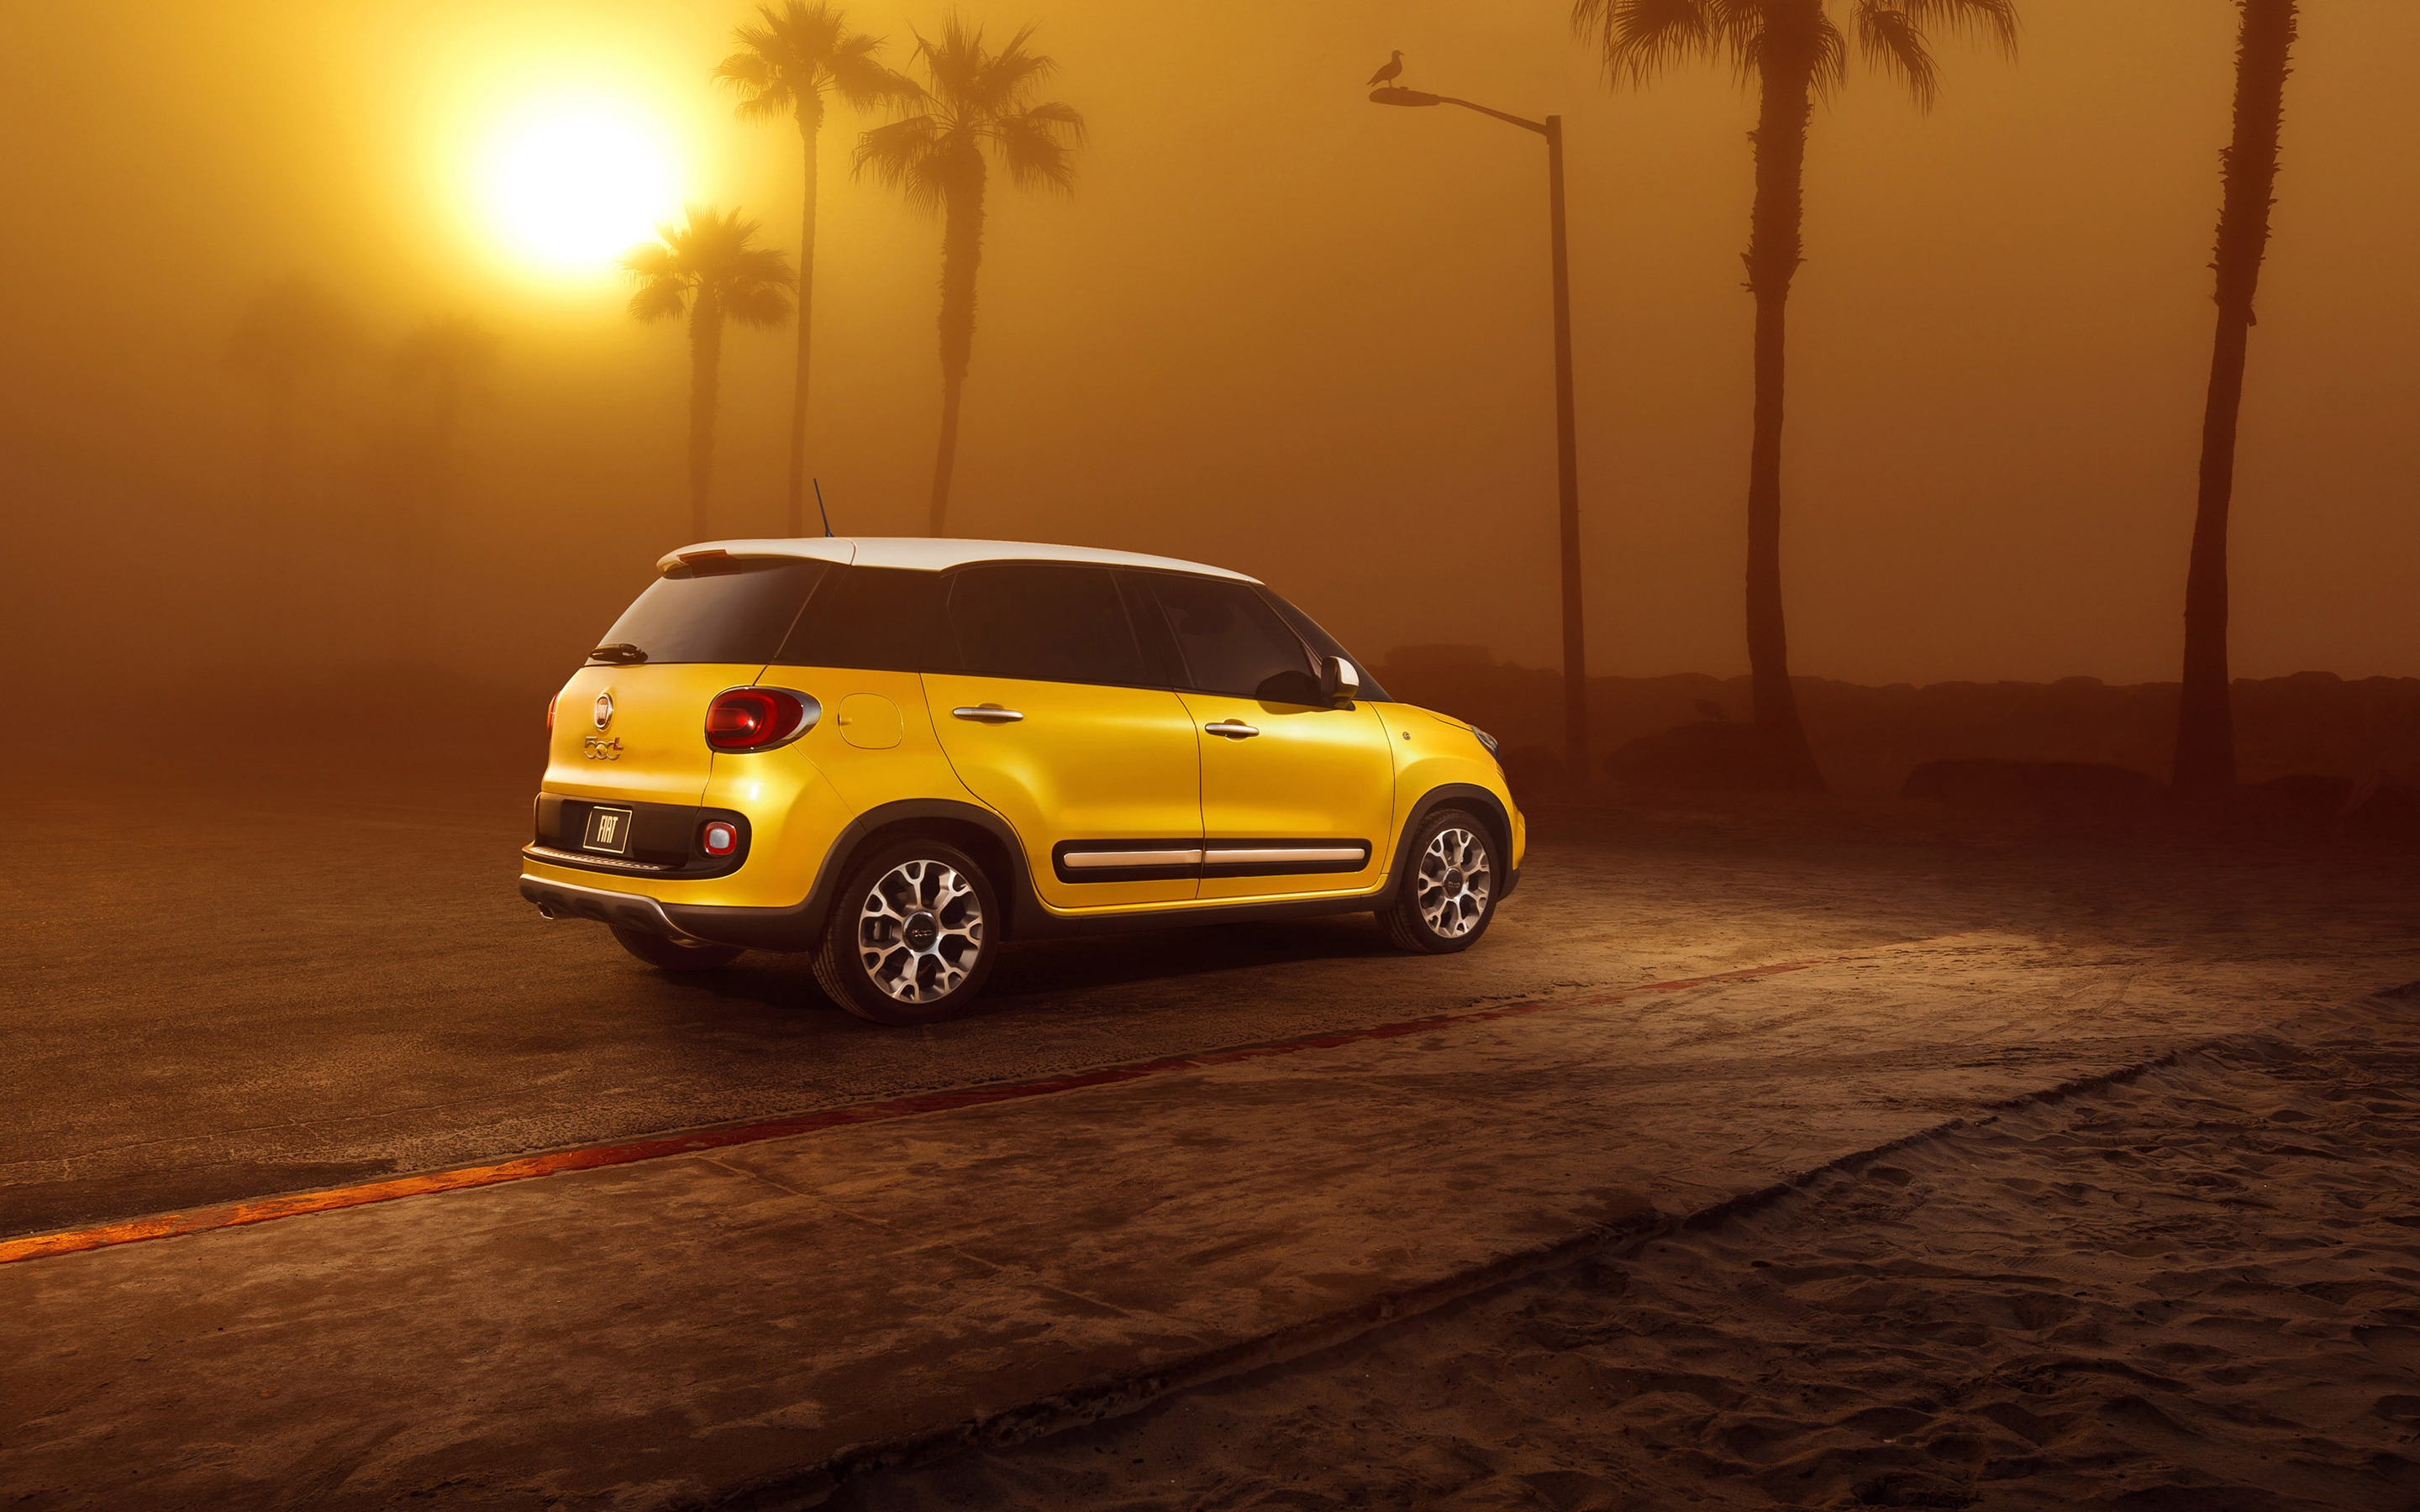 Sunset and Fiat 500L for 2880 x 1800 Retina Display resolution